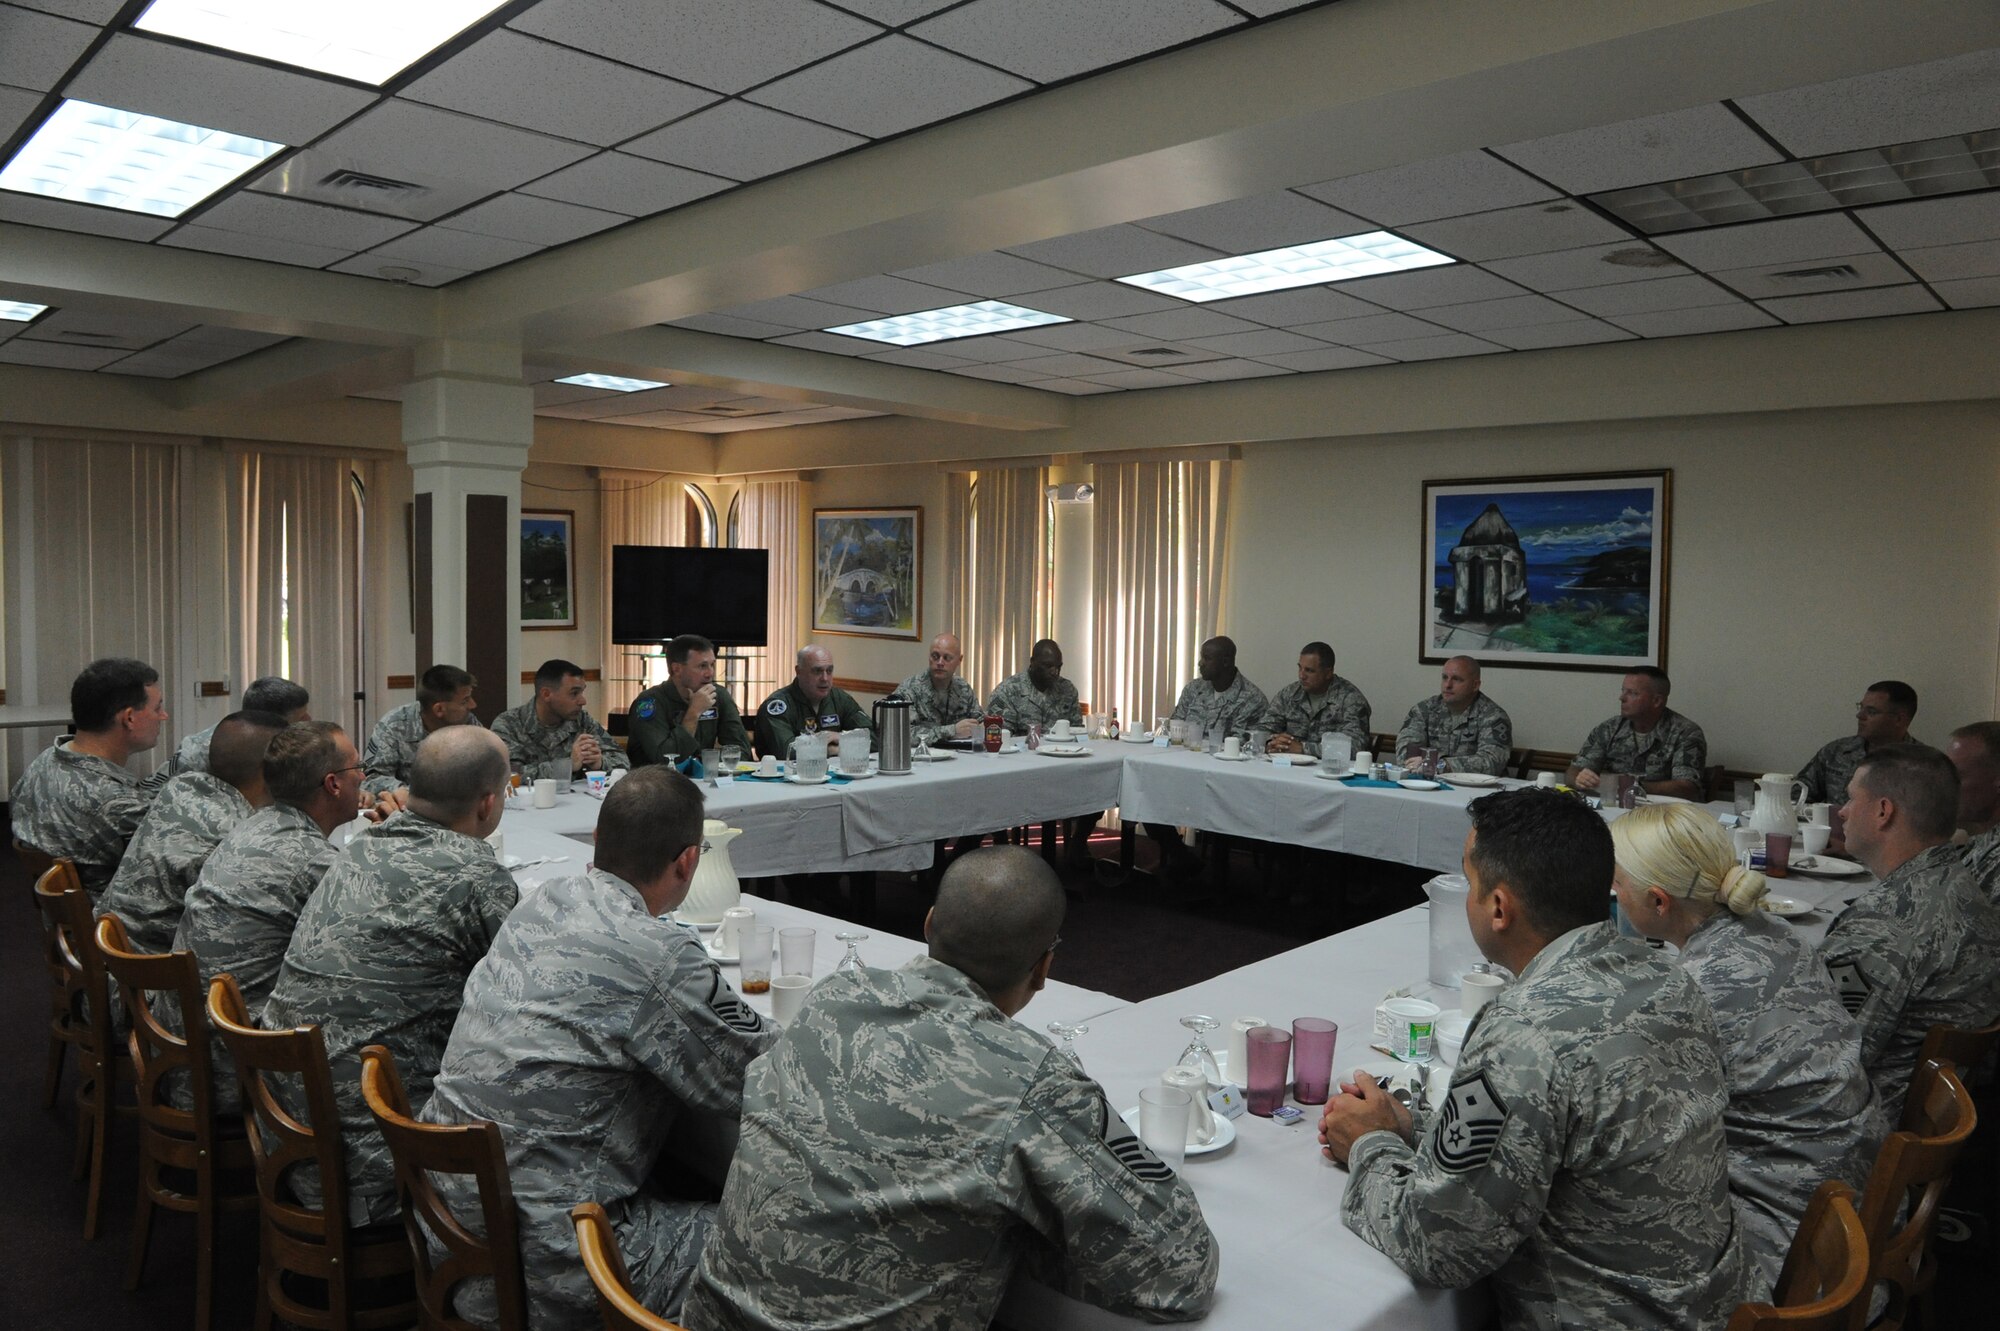 ANDERSEN AIR FORCE BASE, Guam - Air Force Vice Chief of Staff Gen. Carrol ?Howie? Chandler eats breakfast with chief master sergeants and first sergeants at the dining facility at Andersen Air Force Base, Guam, on Aug. 3, 2010.  Topics discussed in the open forum included uniform concerns, fitness and mentorship. General Chandler was accompanied on his visit to Andersen by Pacific Air Forces Vice Commander Maj. Gen. Douglas Owens, a former 36th Wing commander. (U.S. Air Force photo/Tech. Sgt. Mike Andriacco)